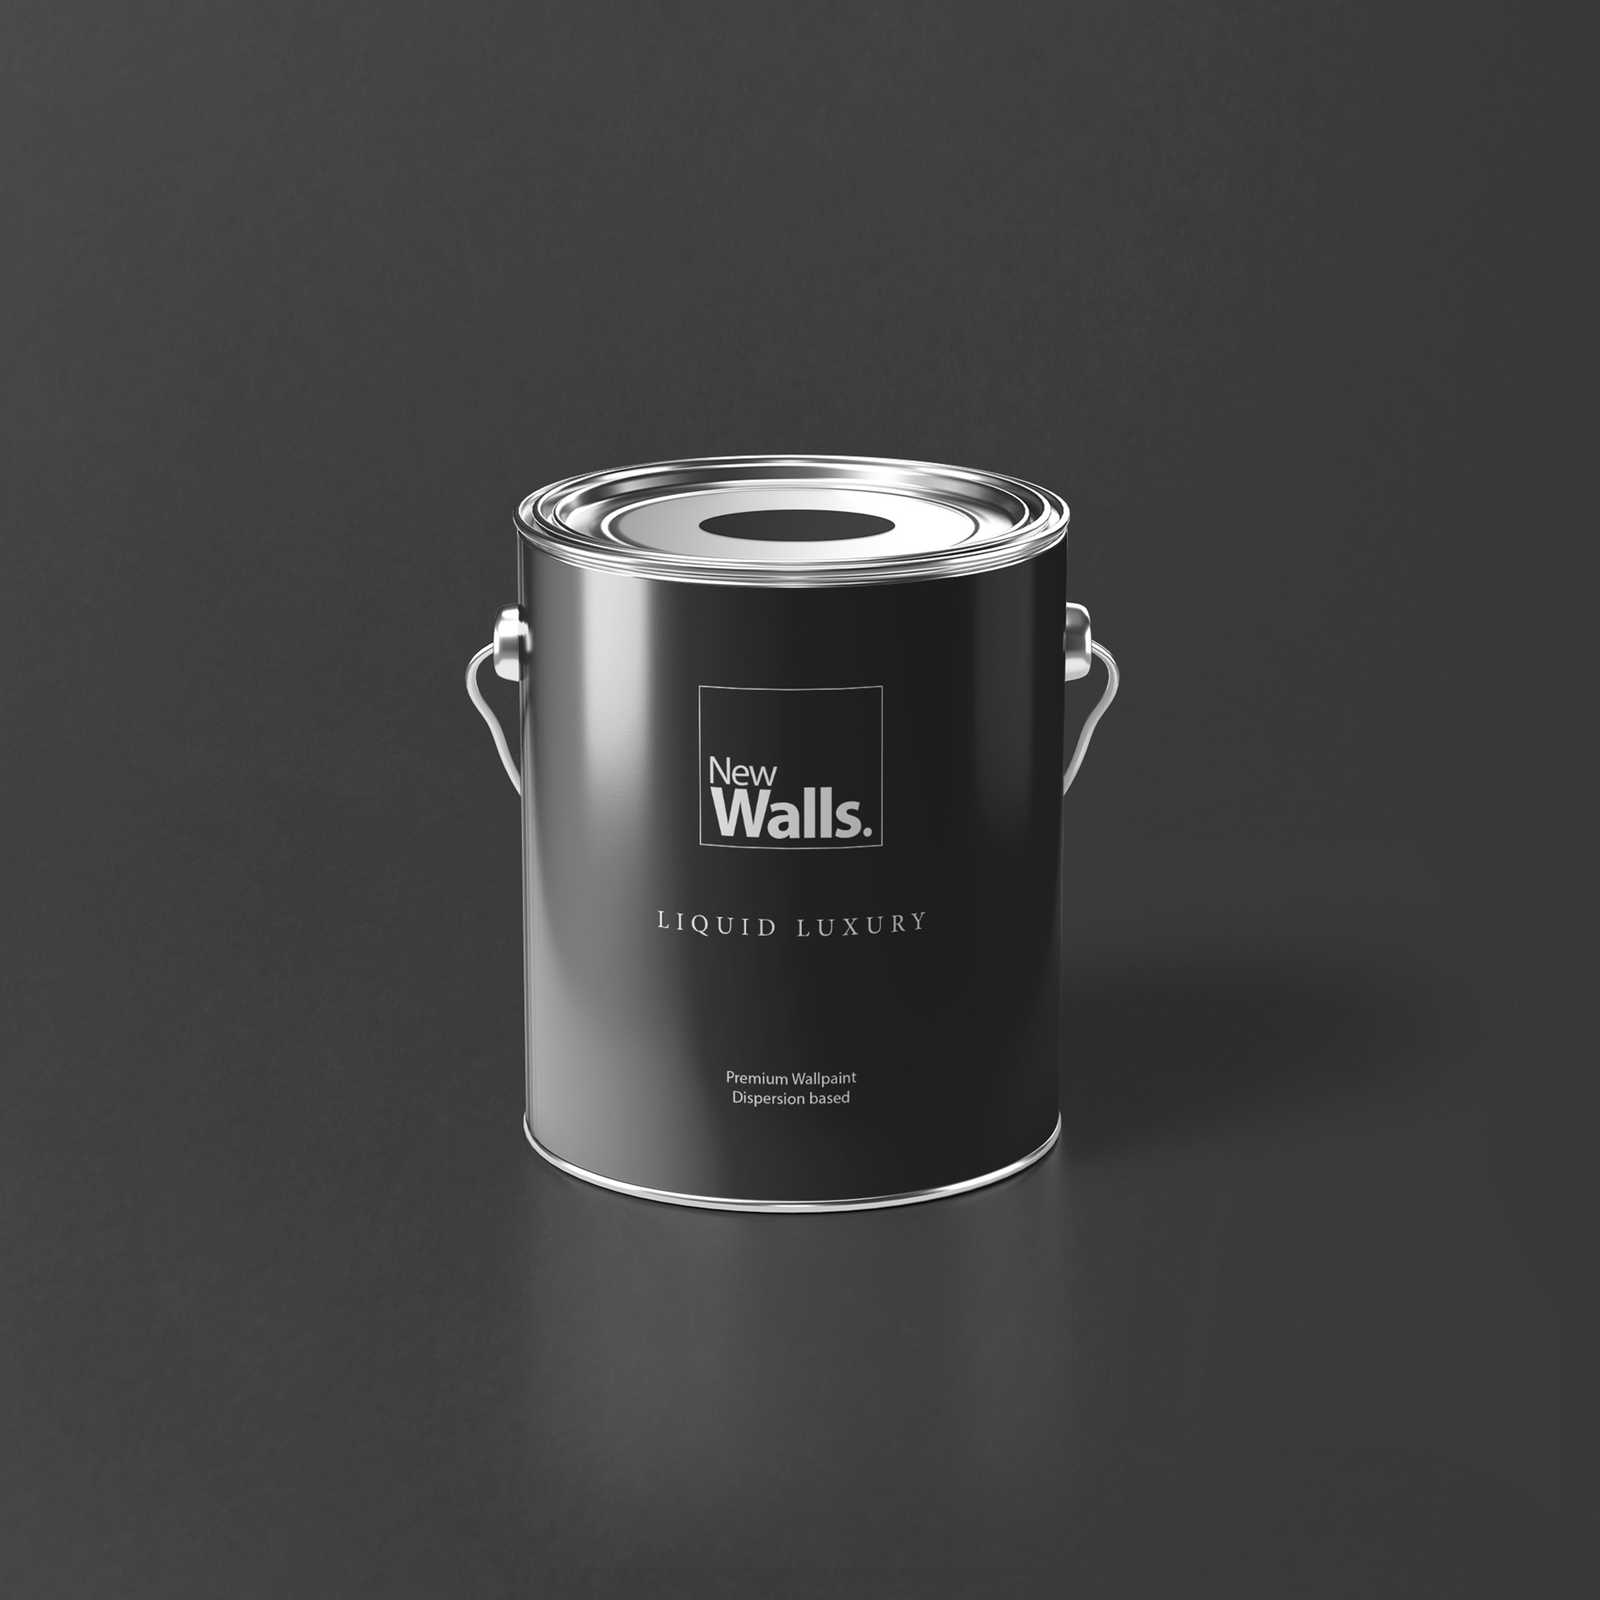 Premium Wall Paint strong black »Charcoal« NW106 – 2.5 litre
